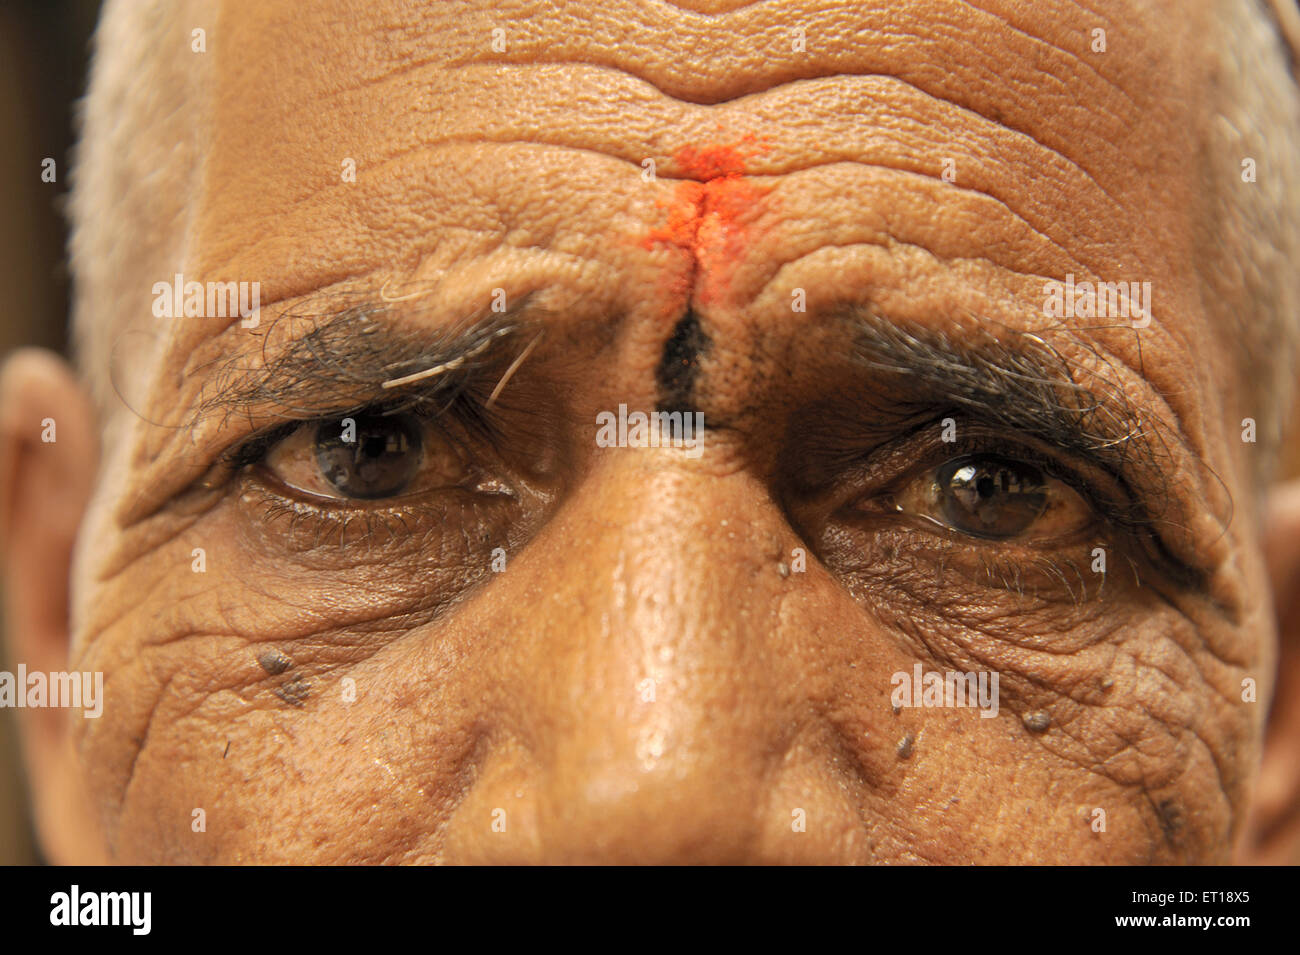 EA of indian Old Man No MR Stock Photo